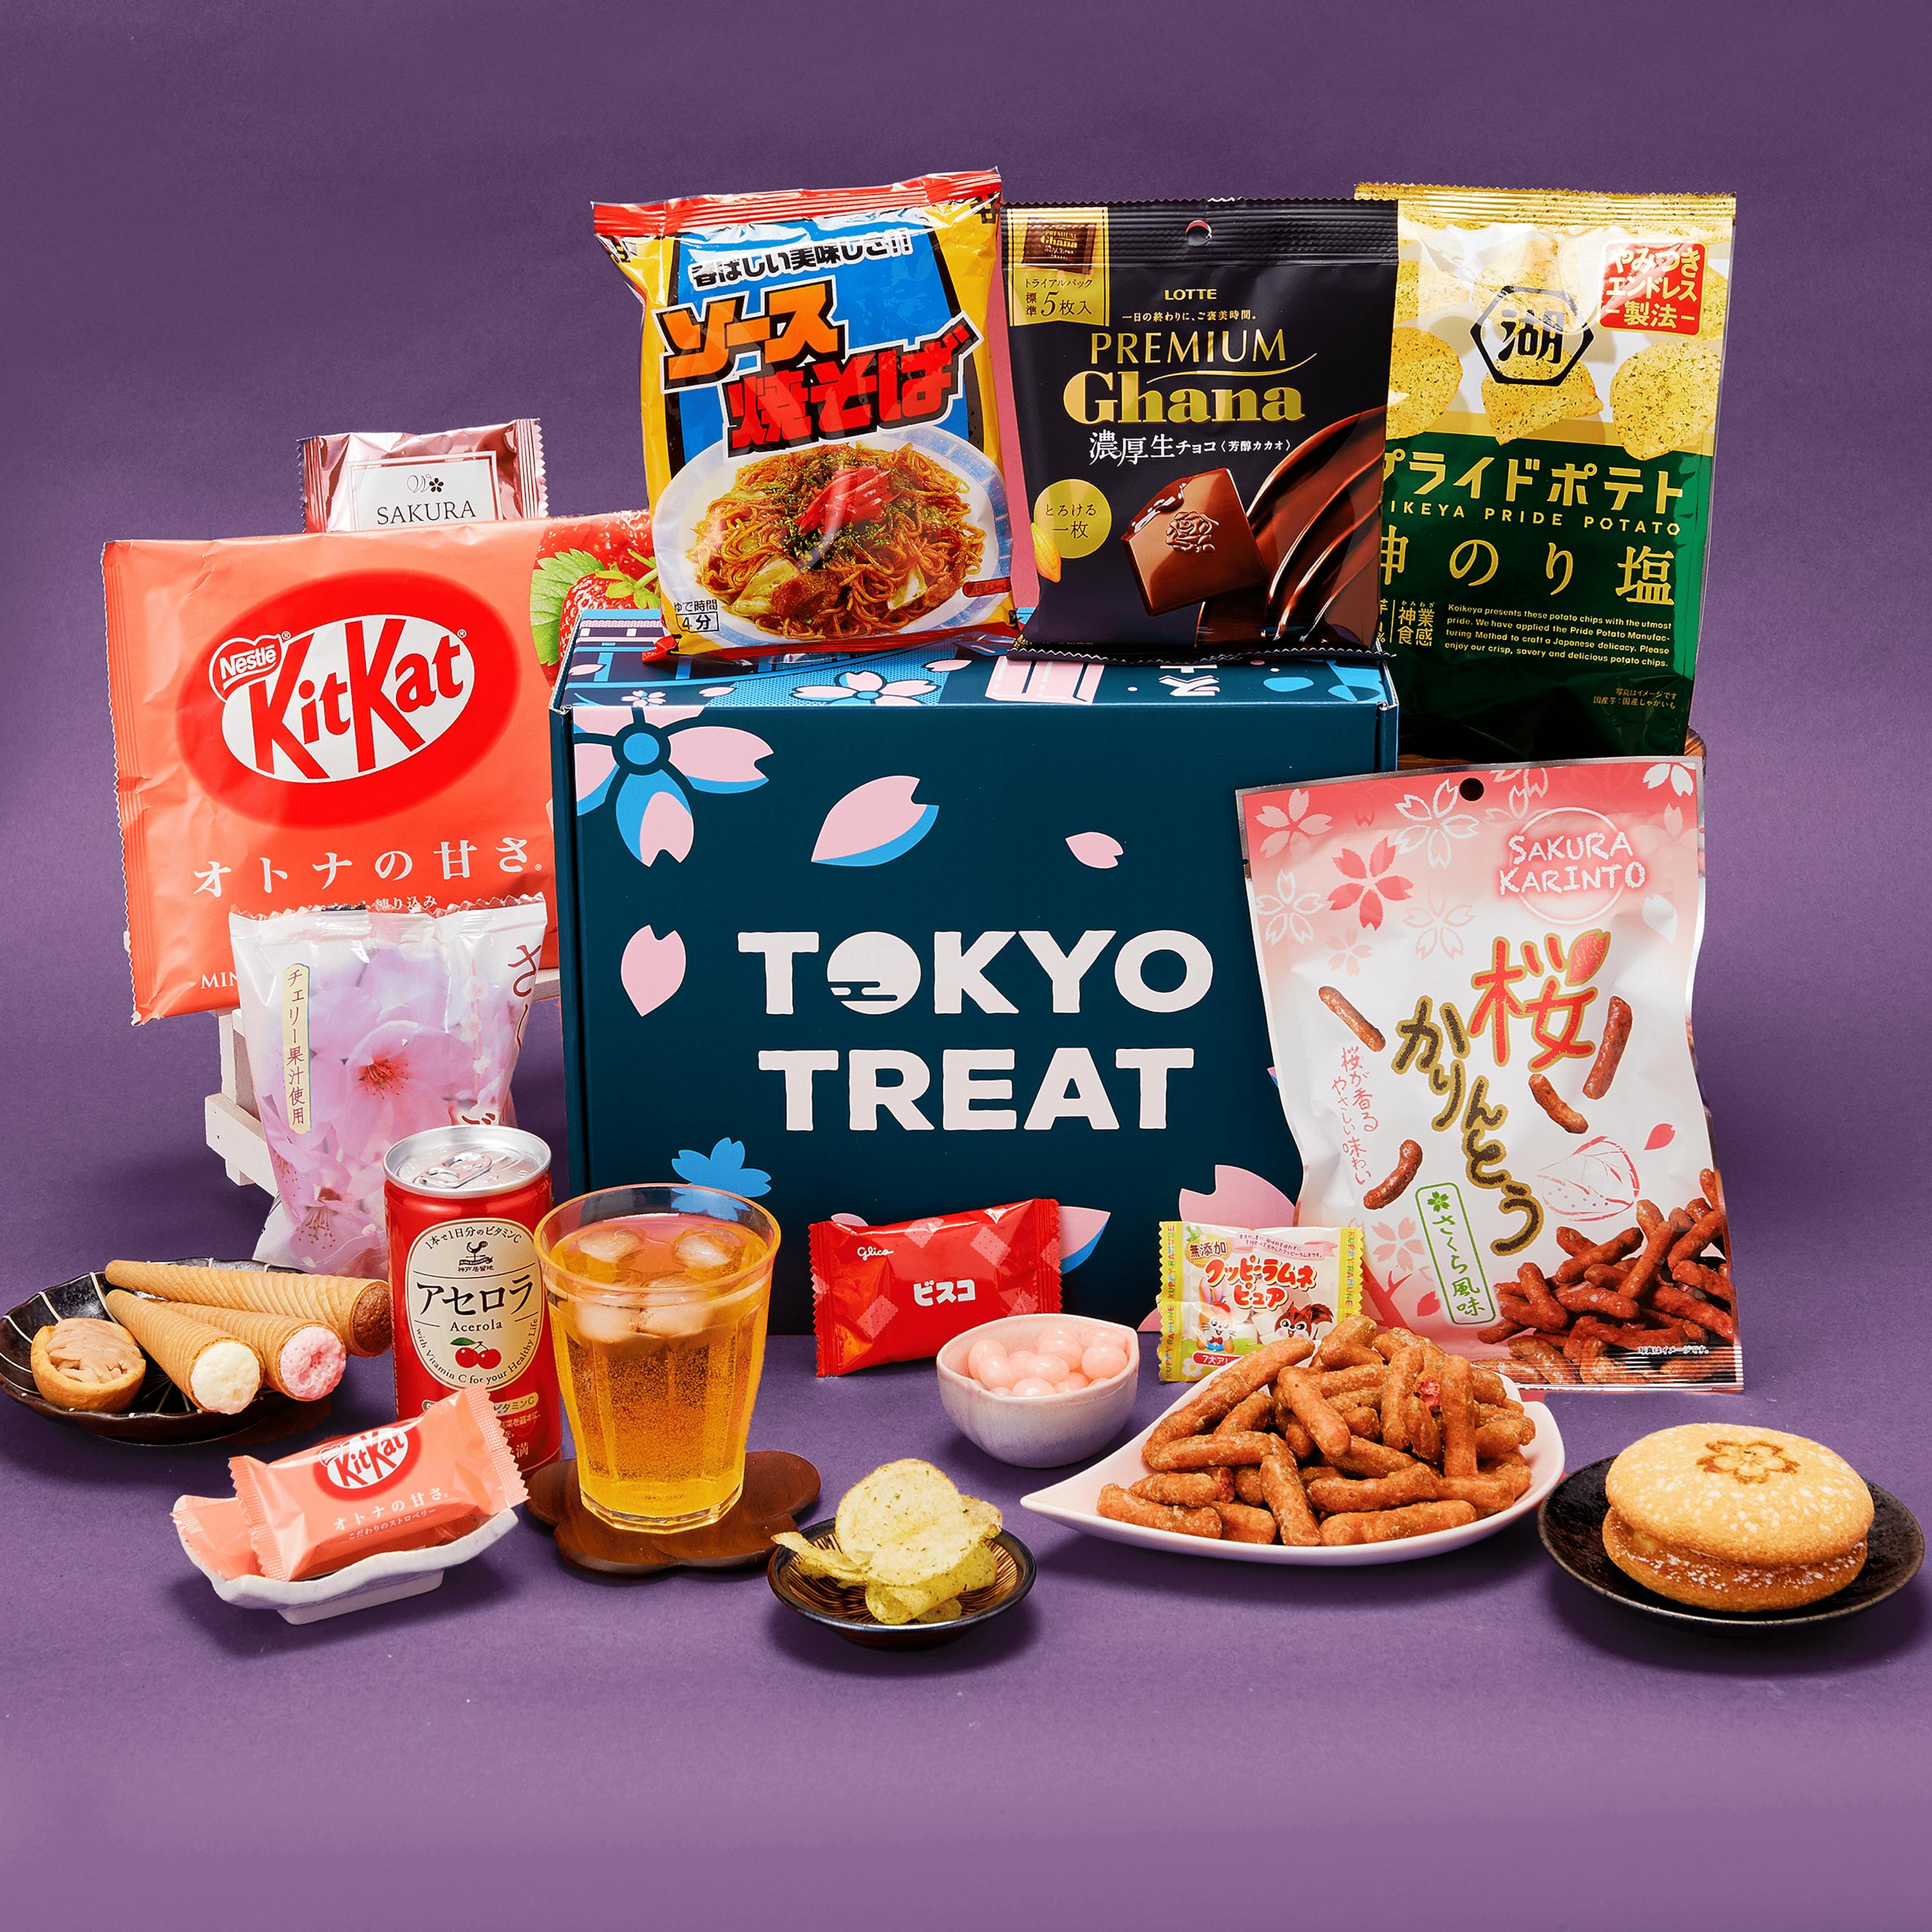 The special-edition TokyoTreat Night Time Sakura box sits  against a dark purple backdrop surrounded by Sakura box items.